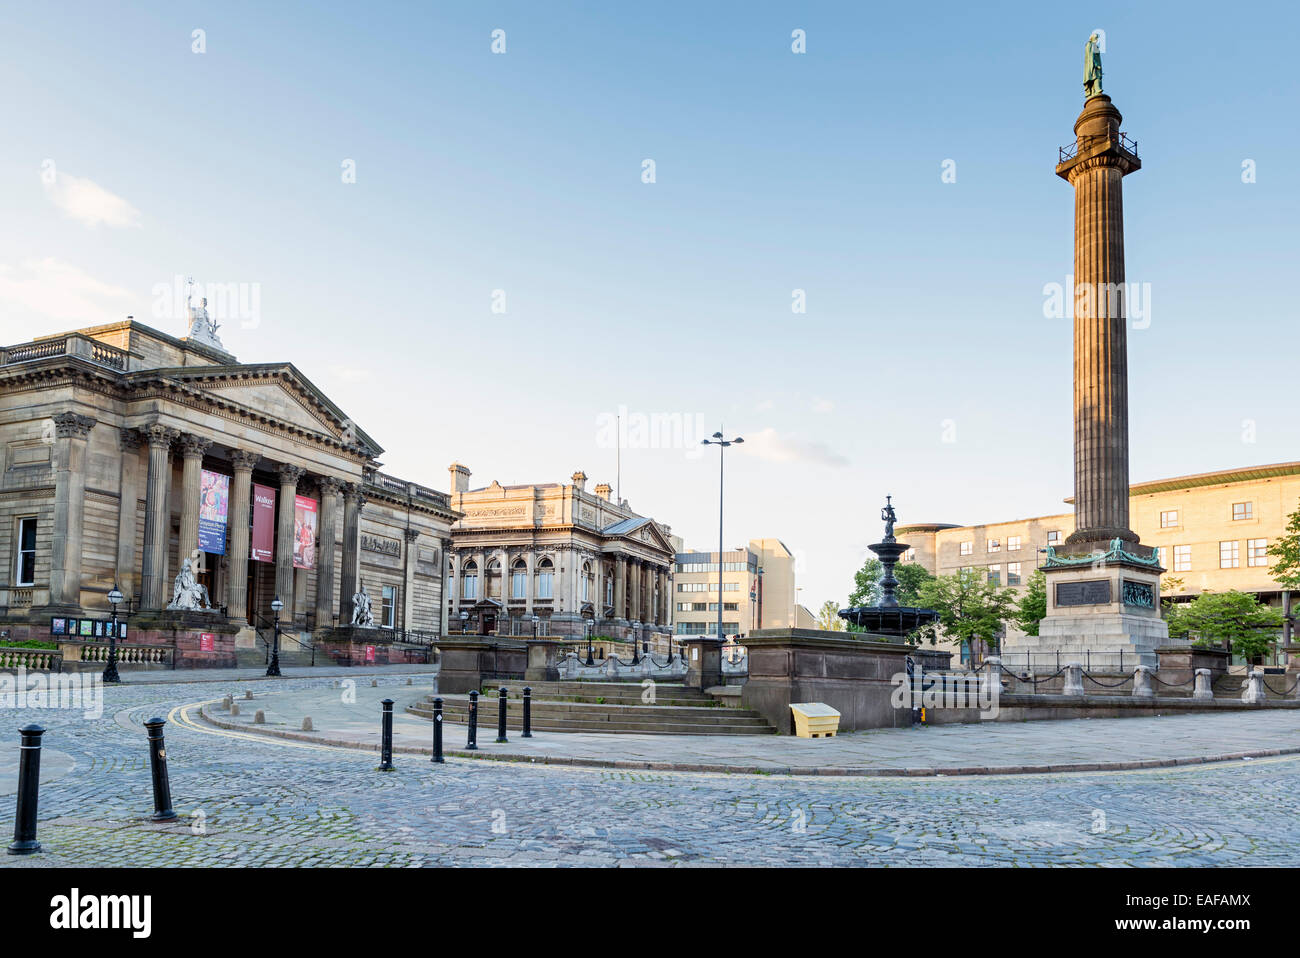 LIVERPOOL, UNITED KINGDOM - JUNE 8, 2014: St. George's Hall, Walker Art Gallery and Wellington's Column in Liverpool Stock Photo